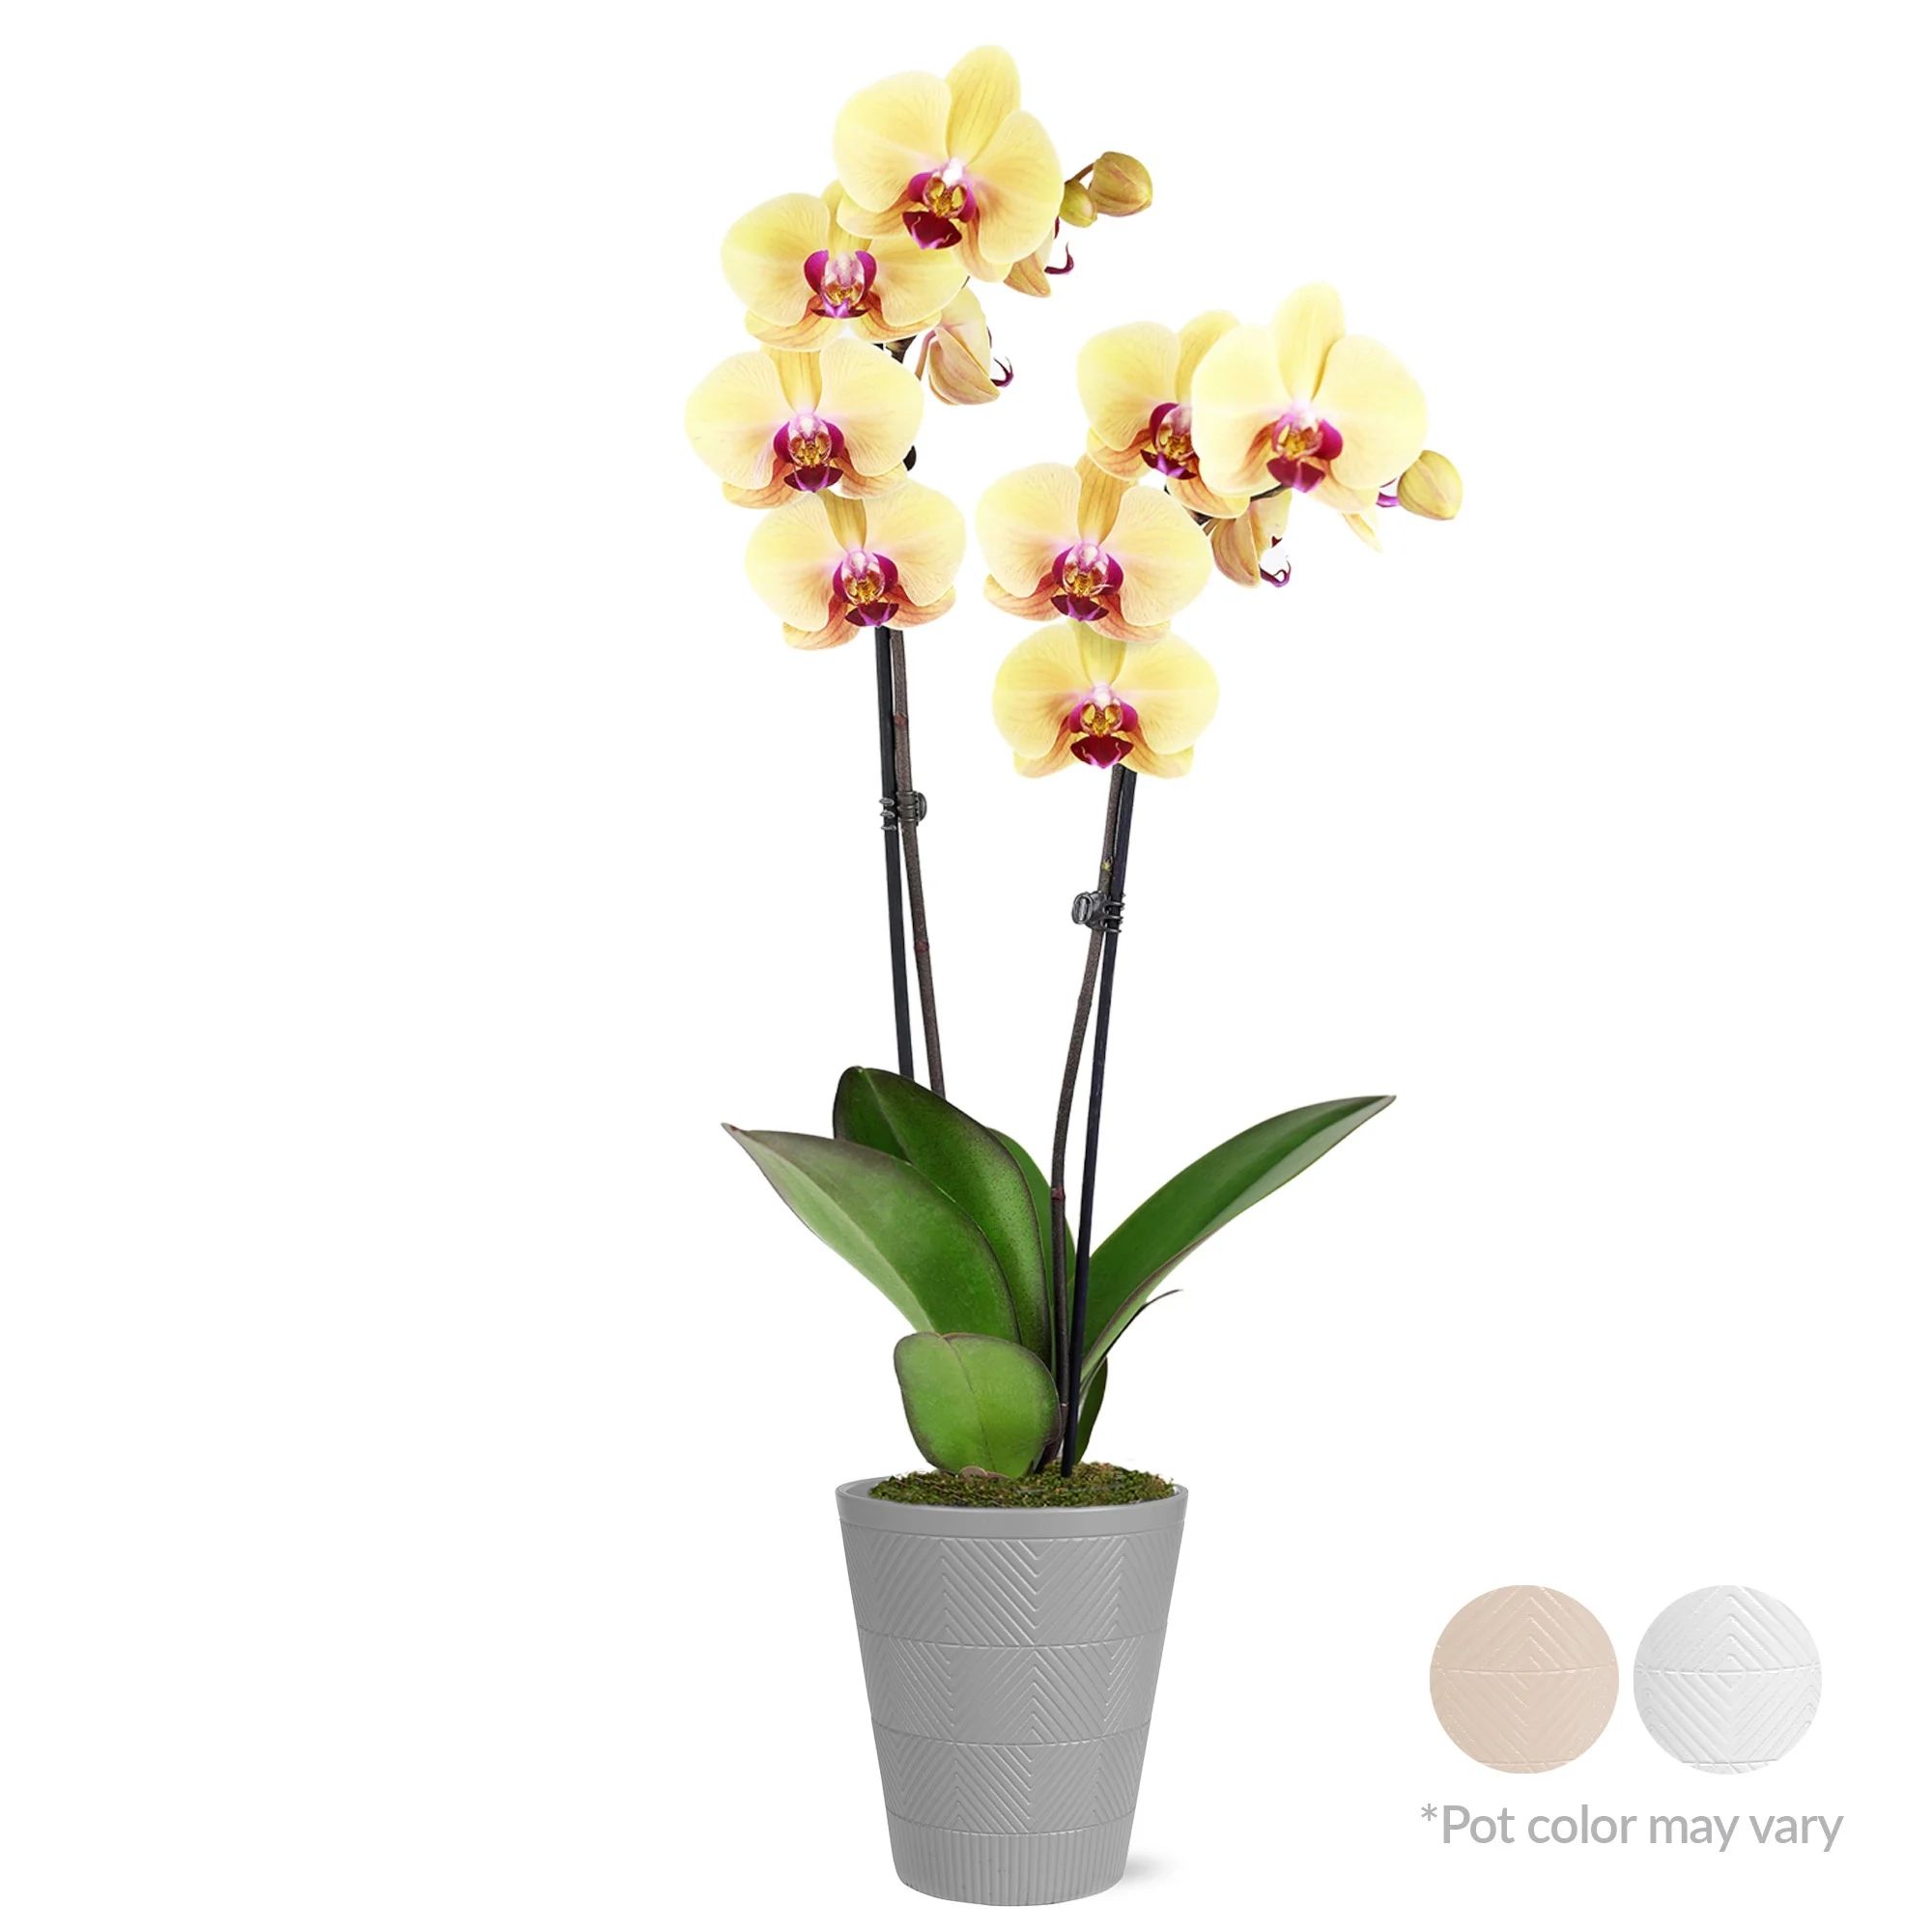 Just Add Ice Live Plant 16-30" Tall Premium Yellow Orchid in 5" Decorative Clay Pot | Walmart (US)